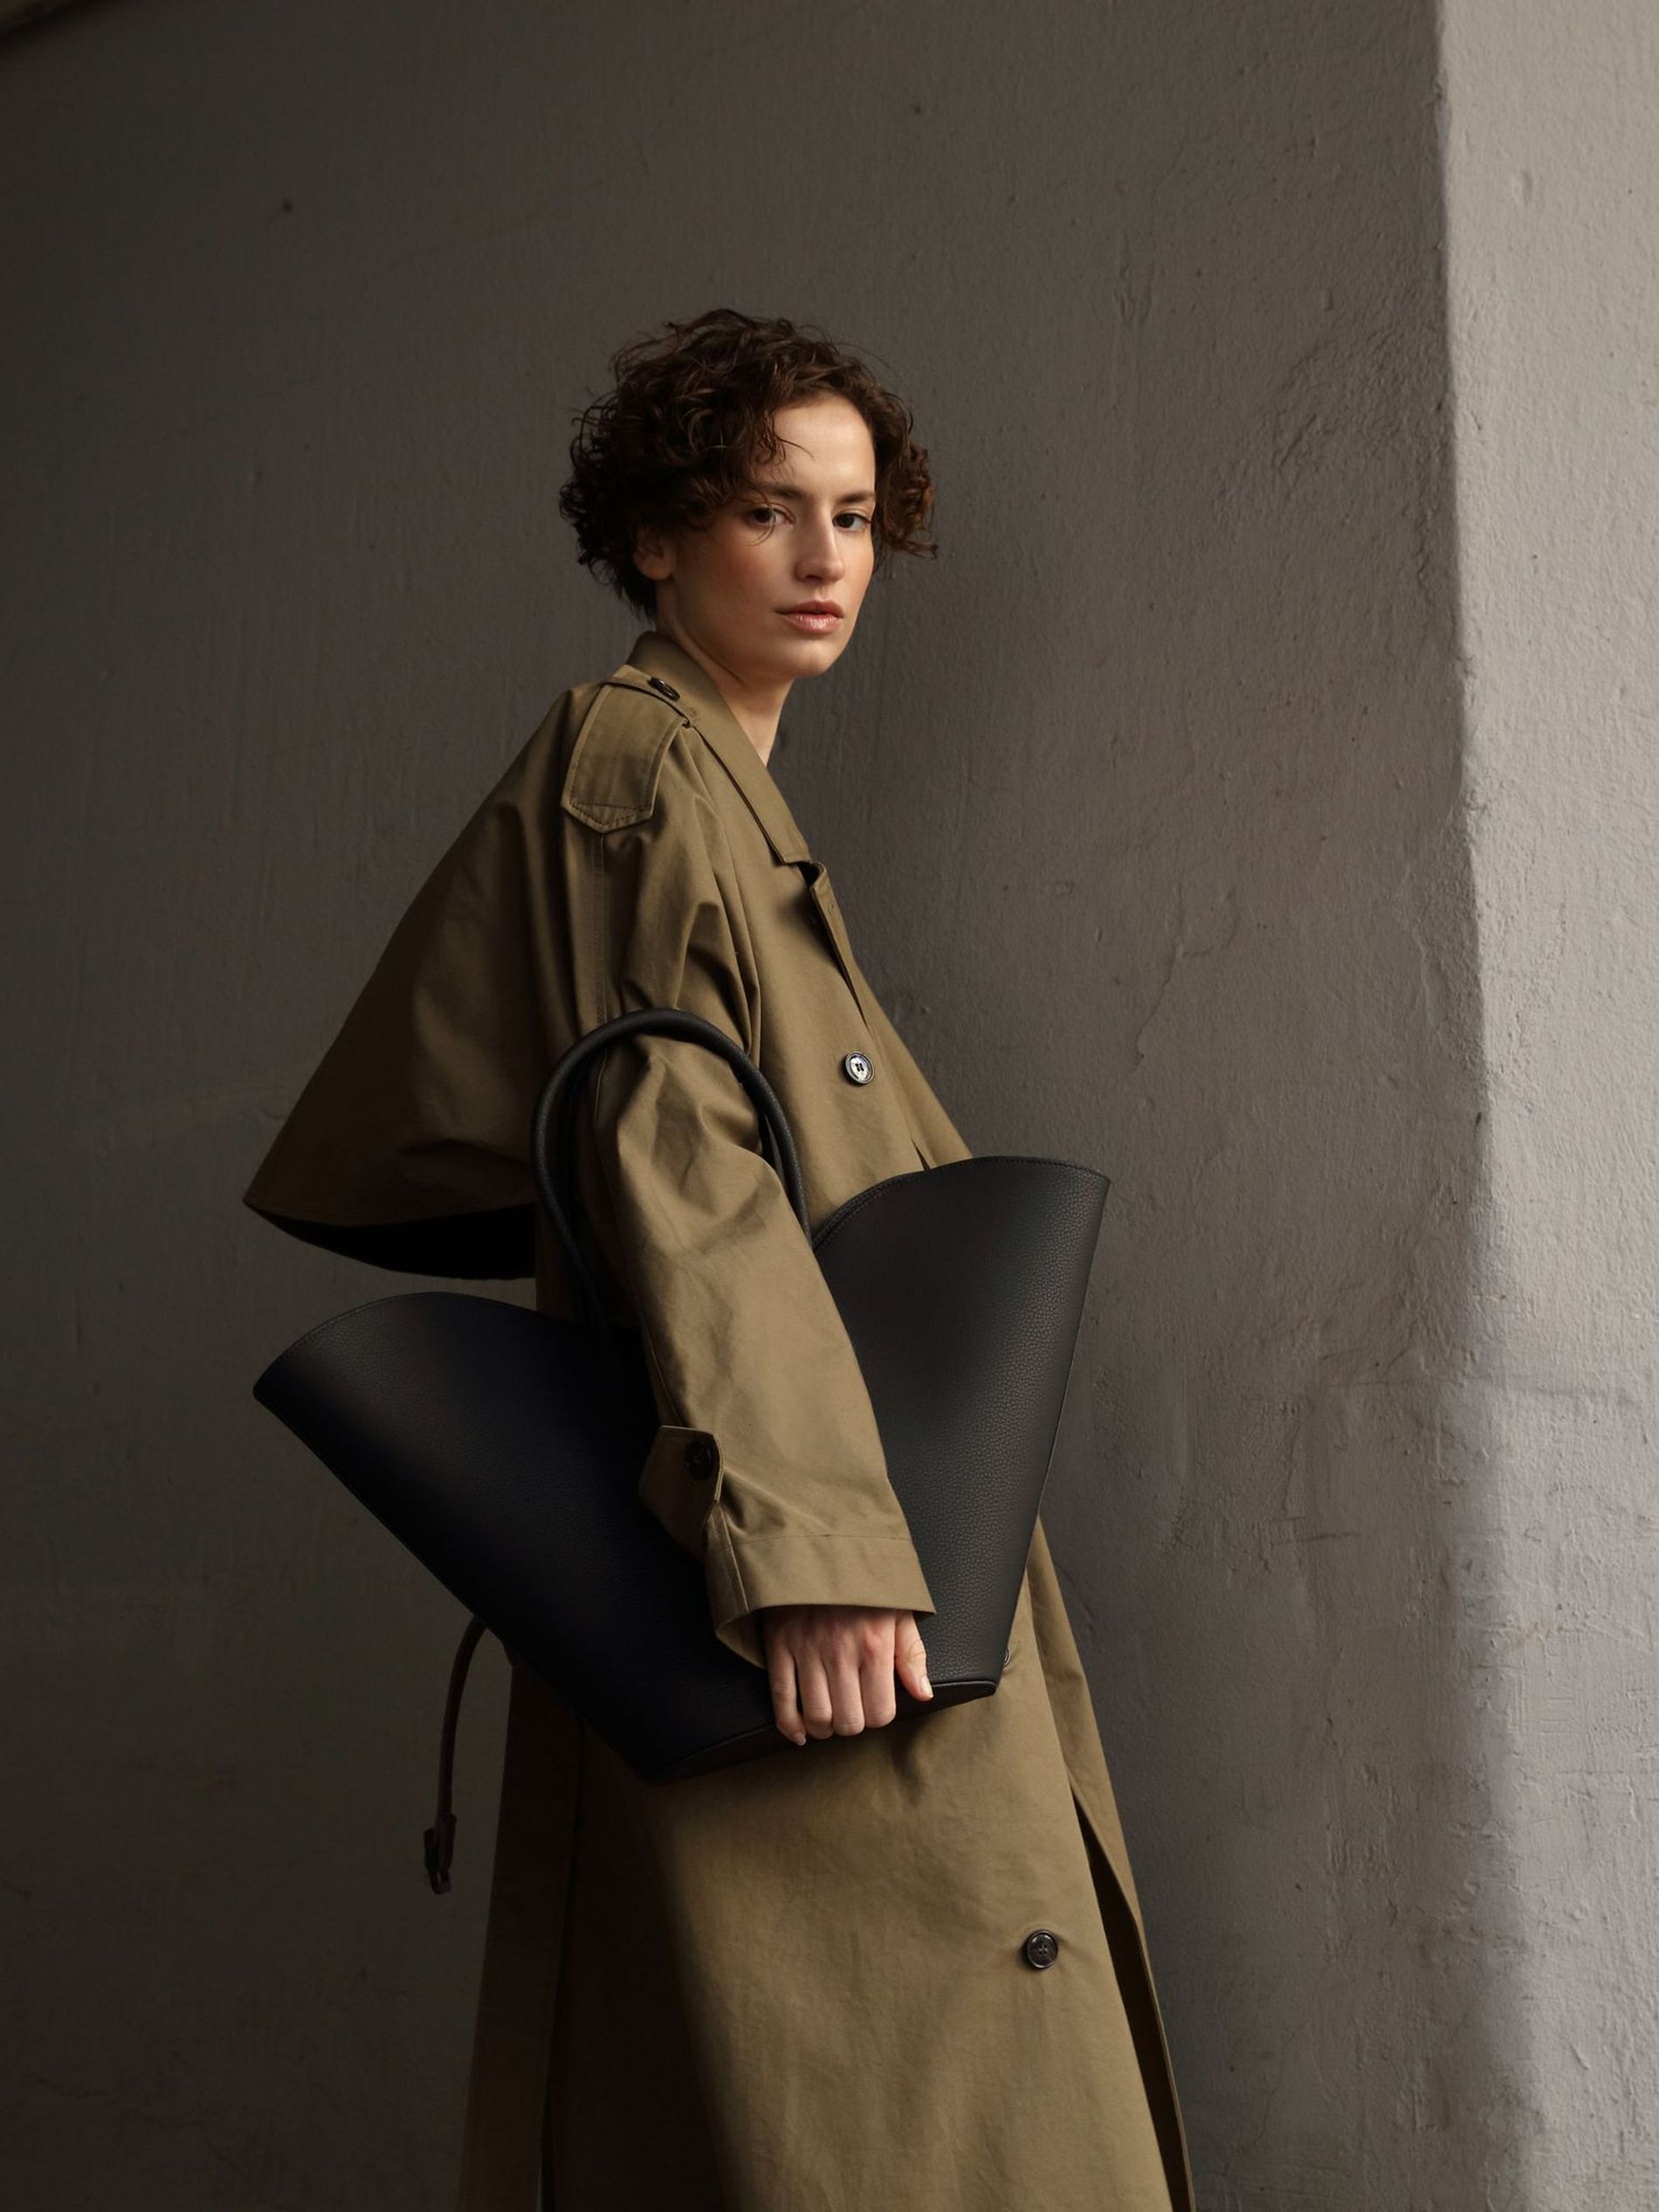 ASK Scandinavia's Mirum bag made from ‘Bio Leather’, the plant-based, leather alternative is not only plastic-free, but both recyclable and circular,